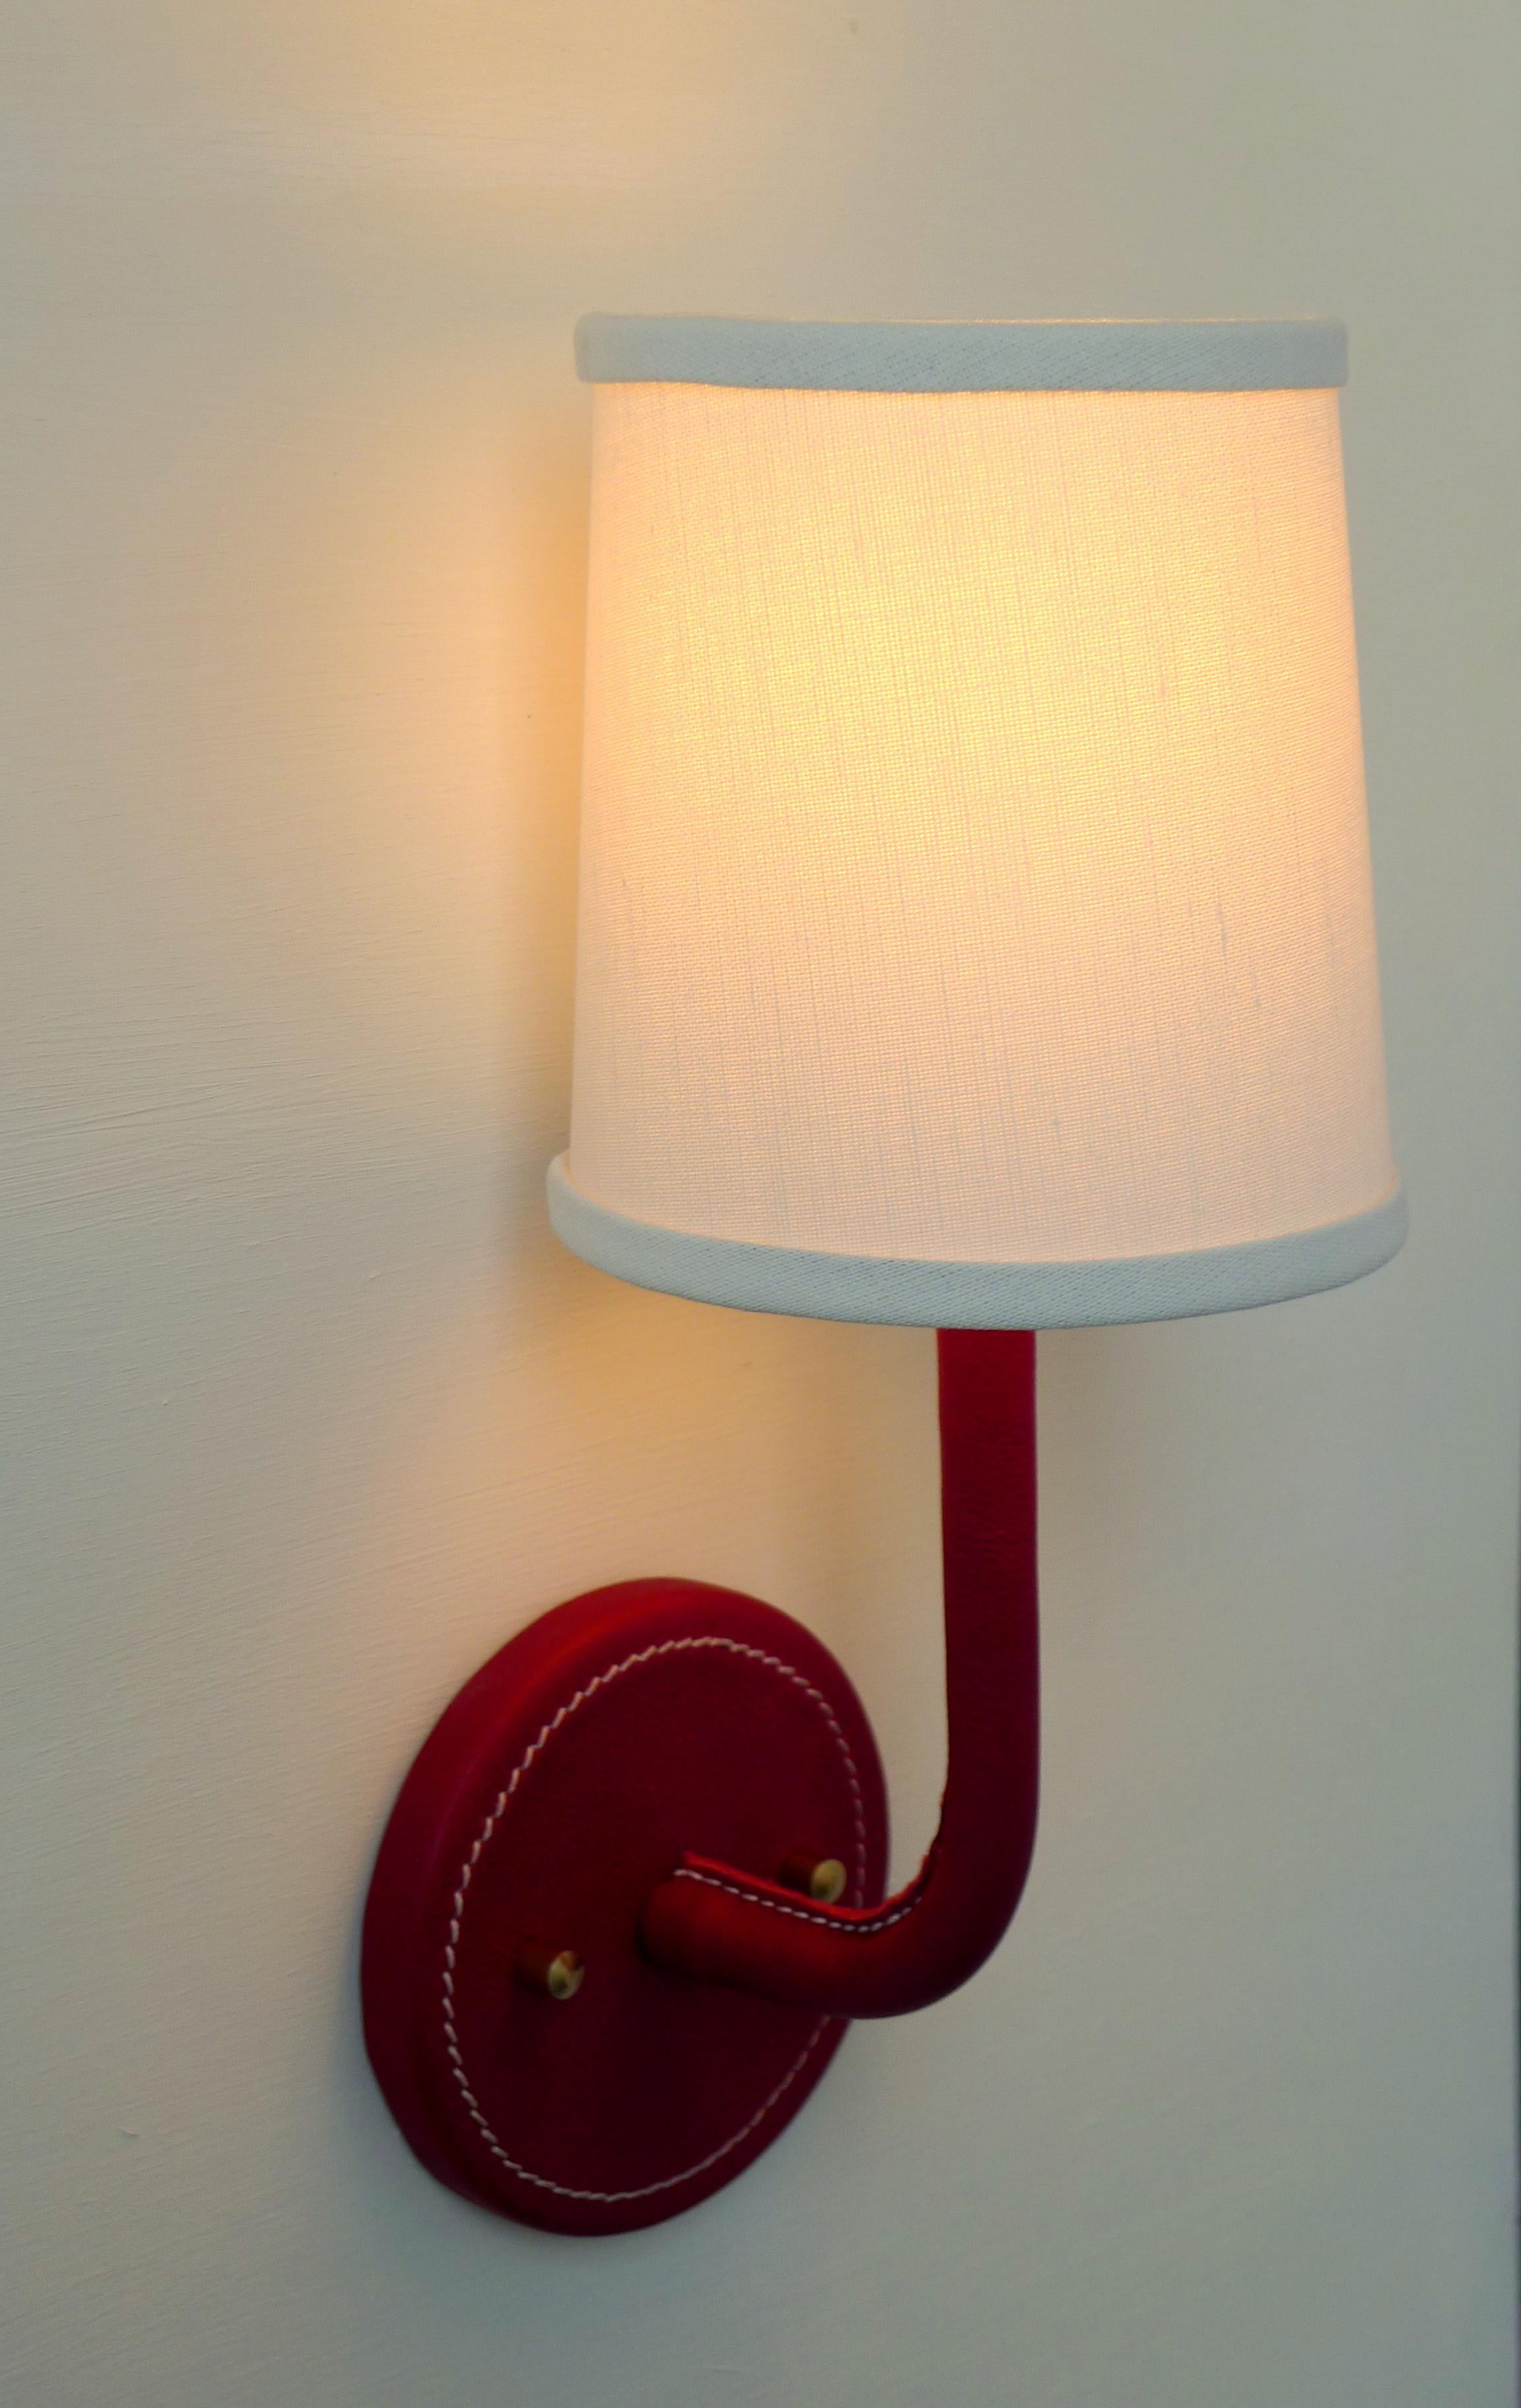 Paul Marra red leather wrapped Adnet inspired wall sconce, with top-stitched detailing. Top-stitching detail is on back plate and inner arm. Linen shade. Brass hardware. Dimensions provided are overall with shade. The shade is 4.5 top and 5.5